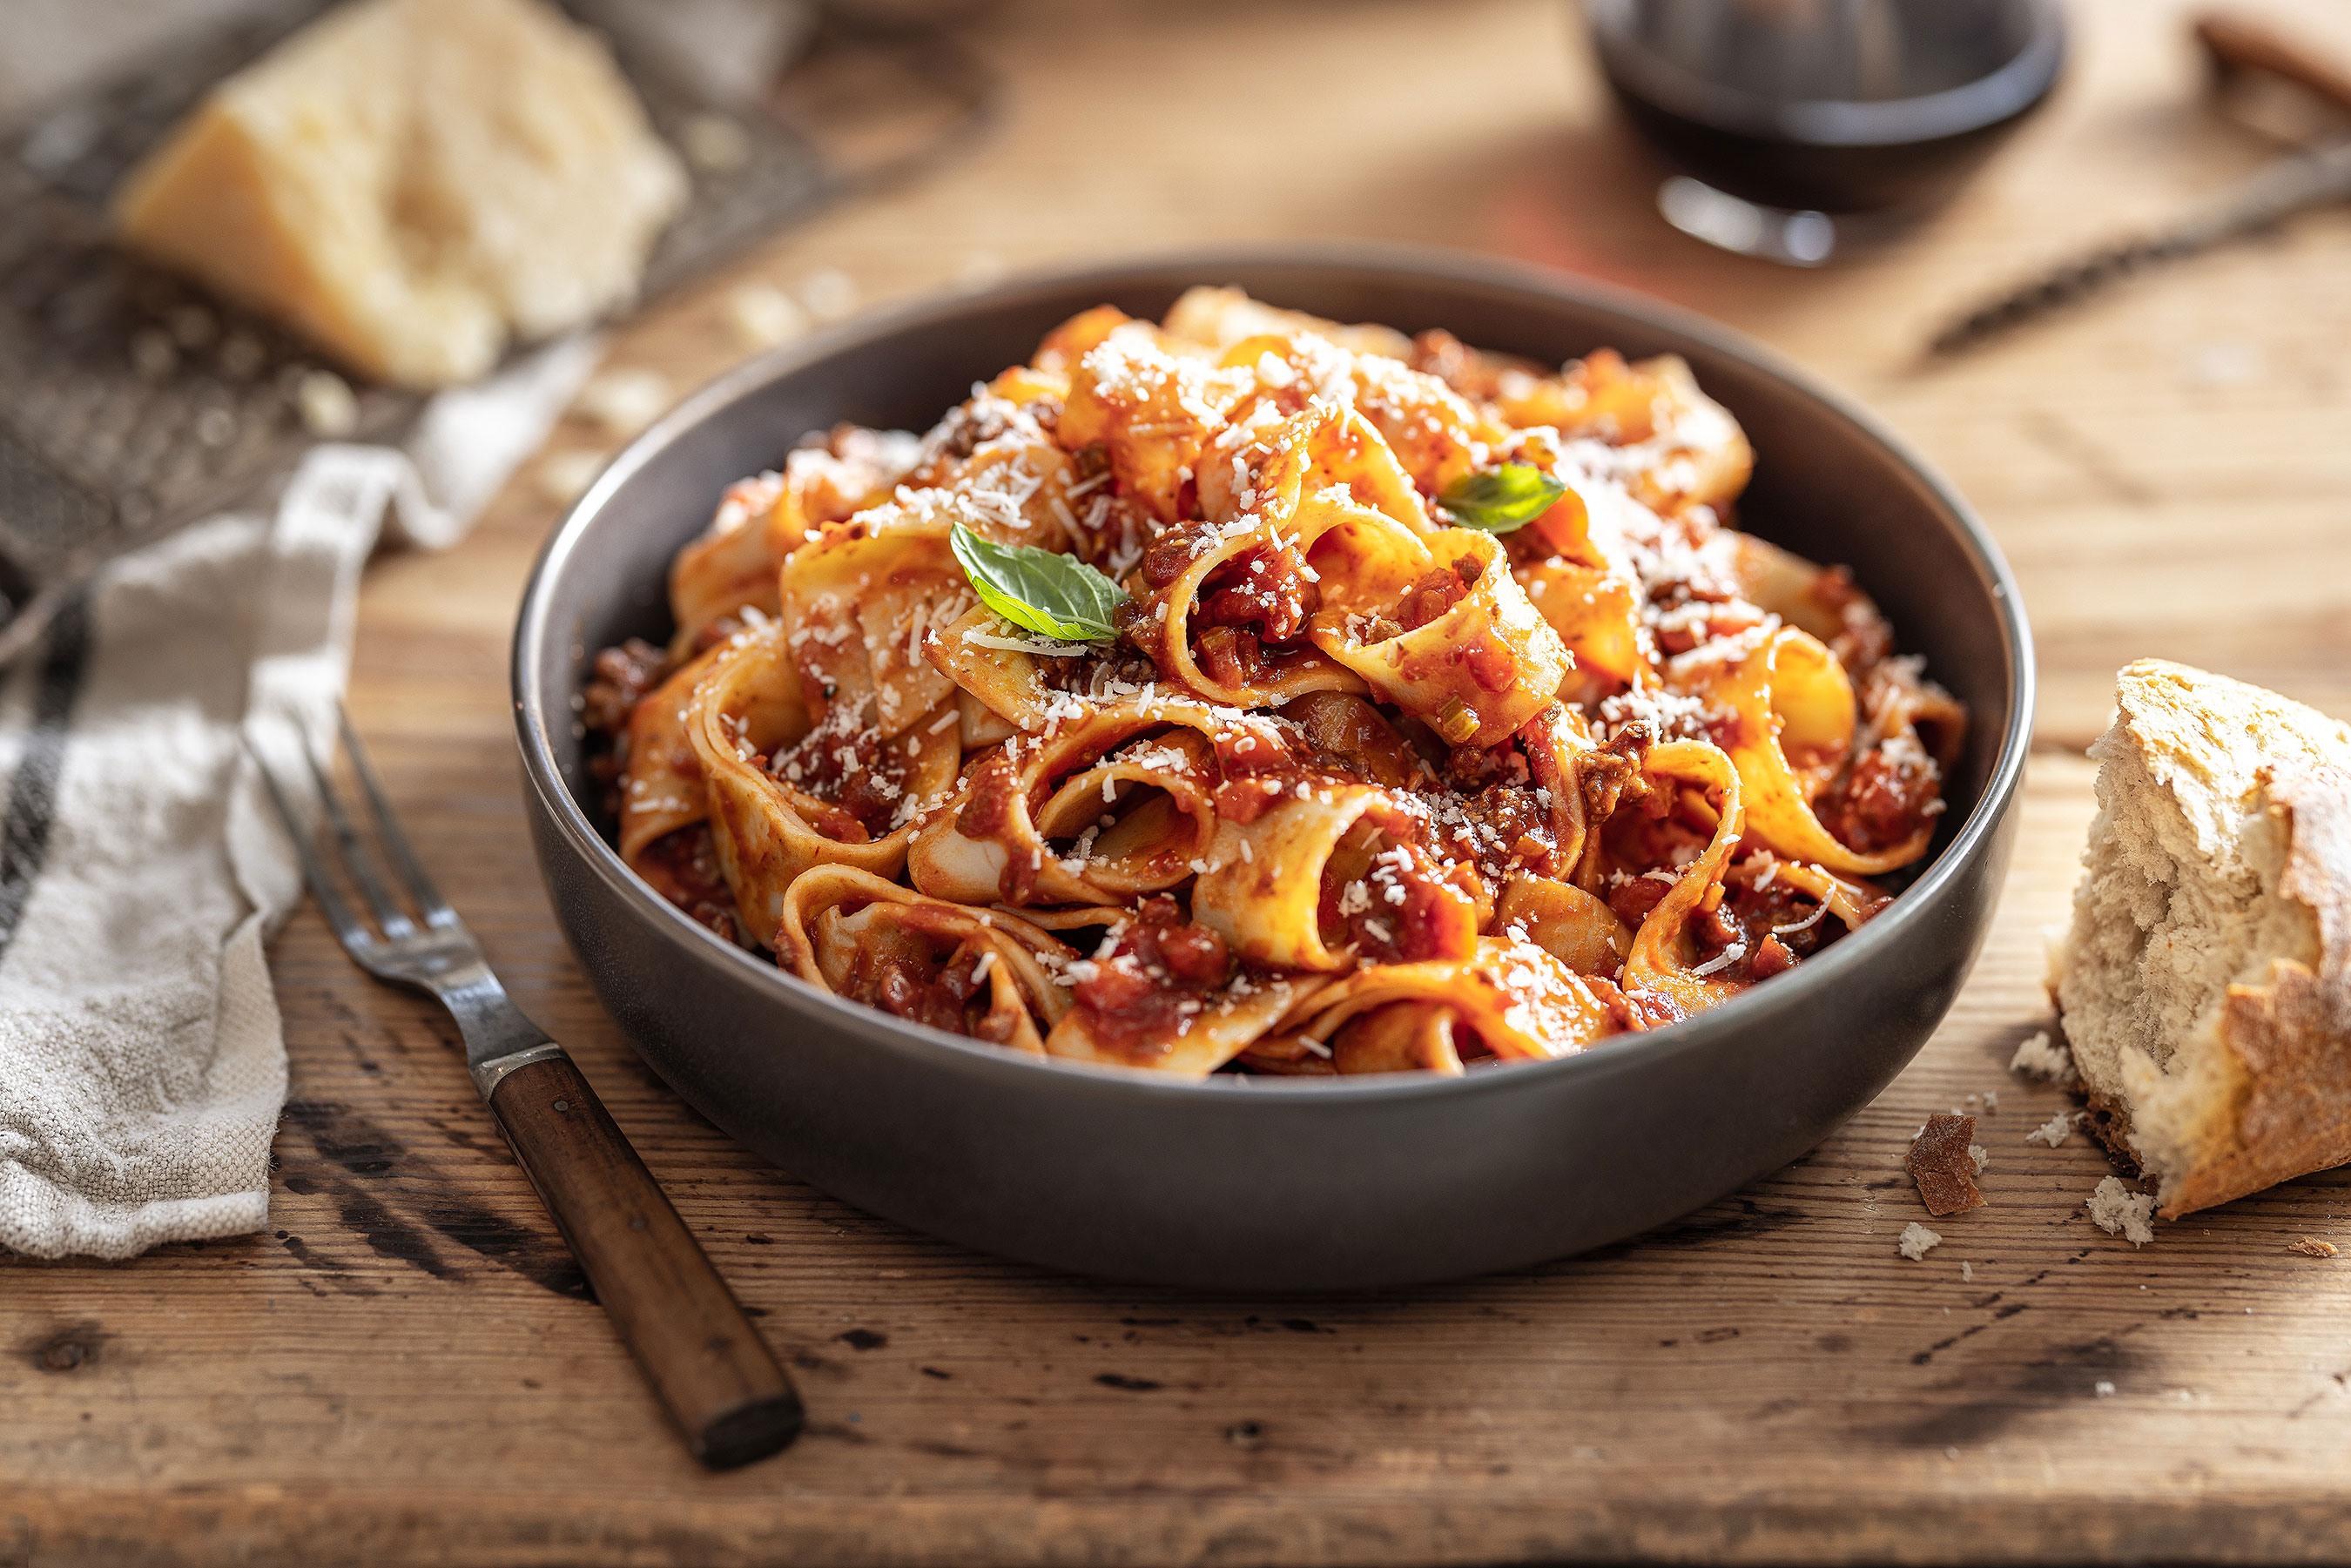 Glanger Photography | Rustic pasta bolognese with wide Pappardelle noodles on a wood surface with tomato marinara sauce in a low bowl. 